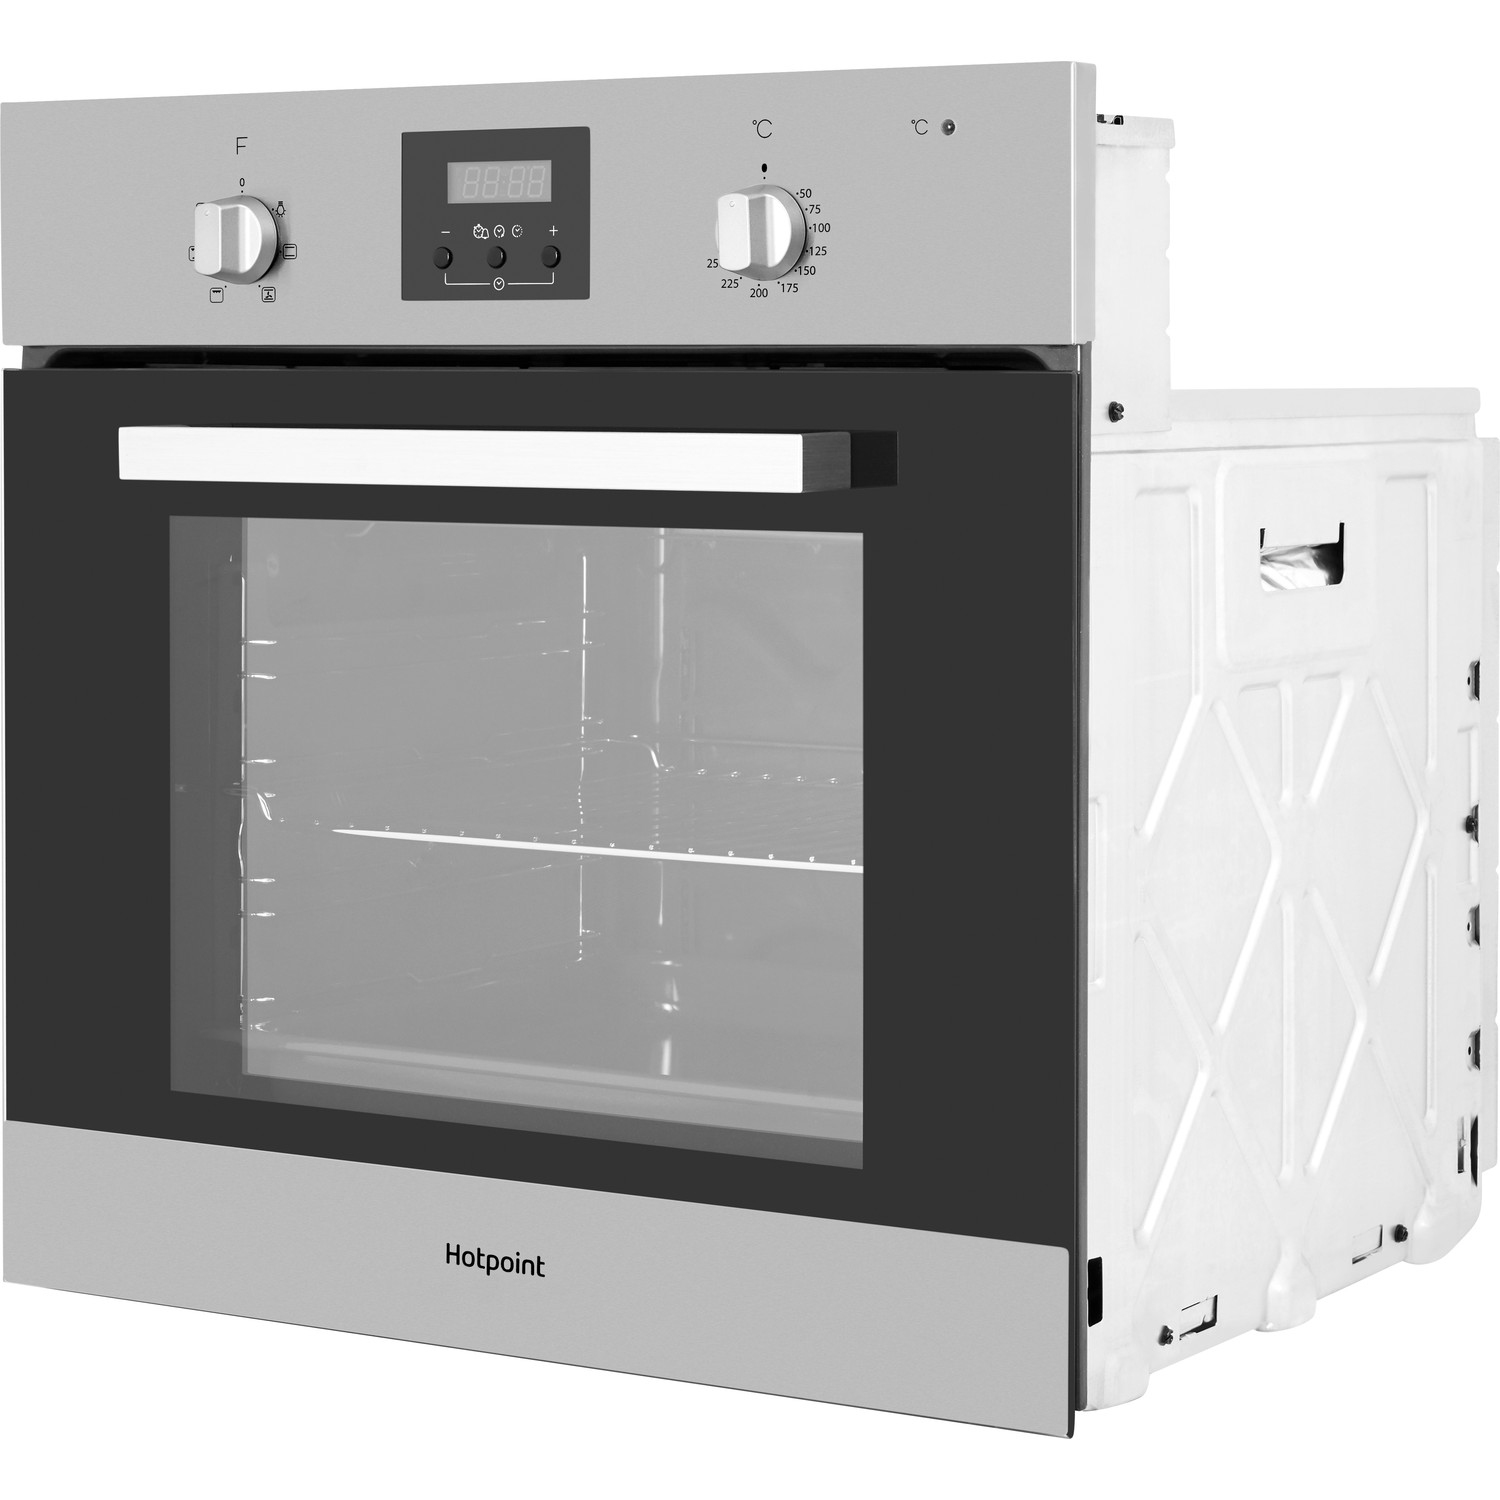 Hotpoint AOY54CIX 59.5cm Built In Electric Single Oven - Silver - 2